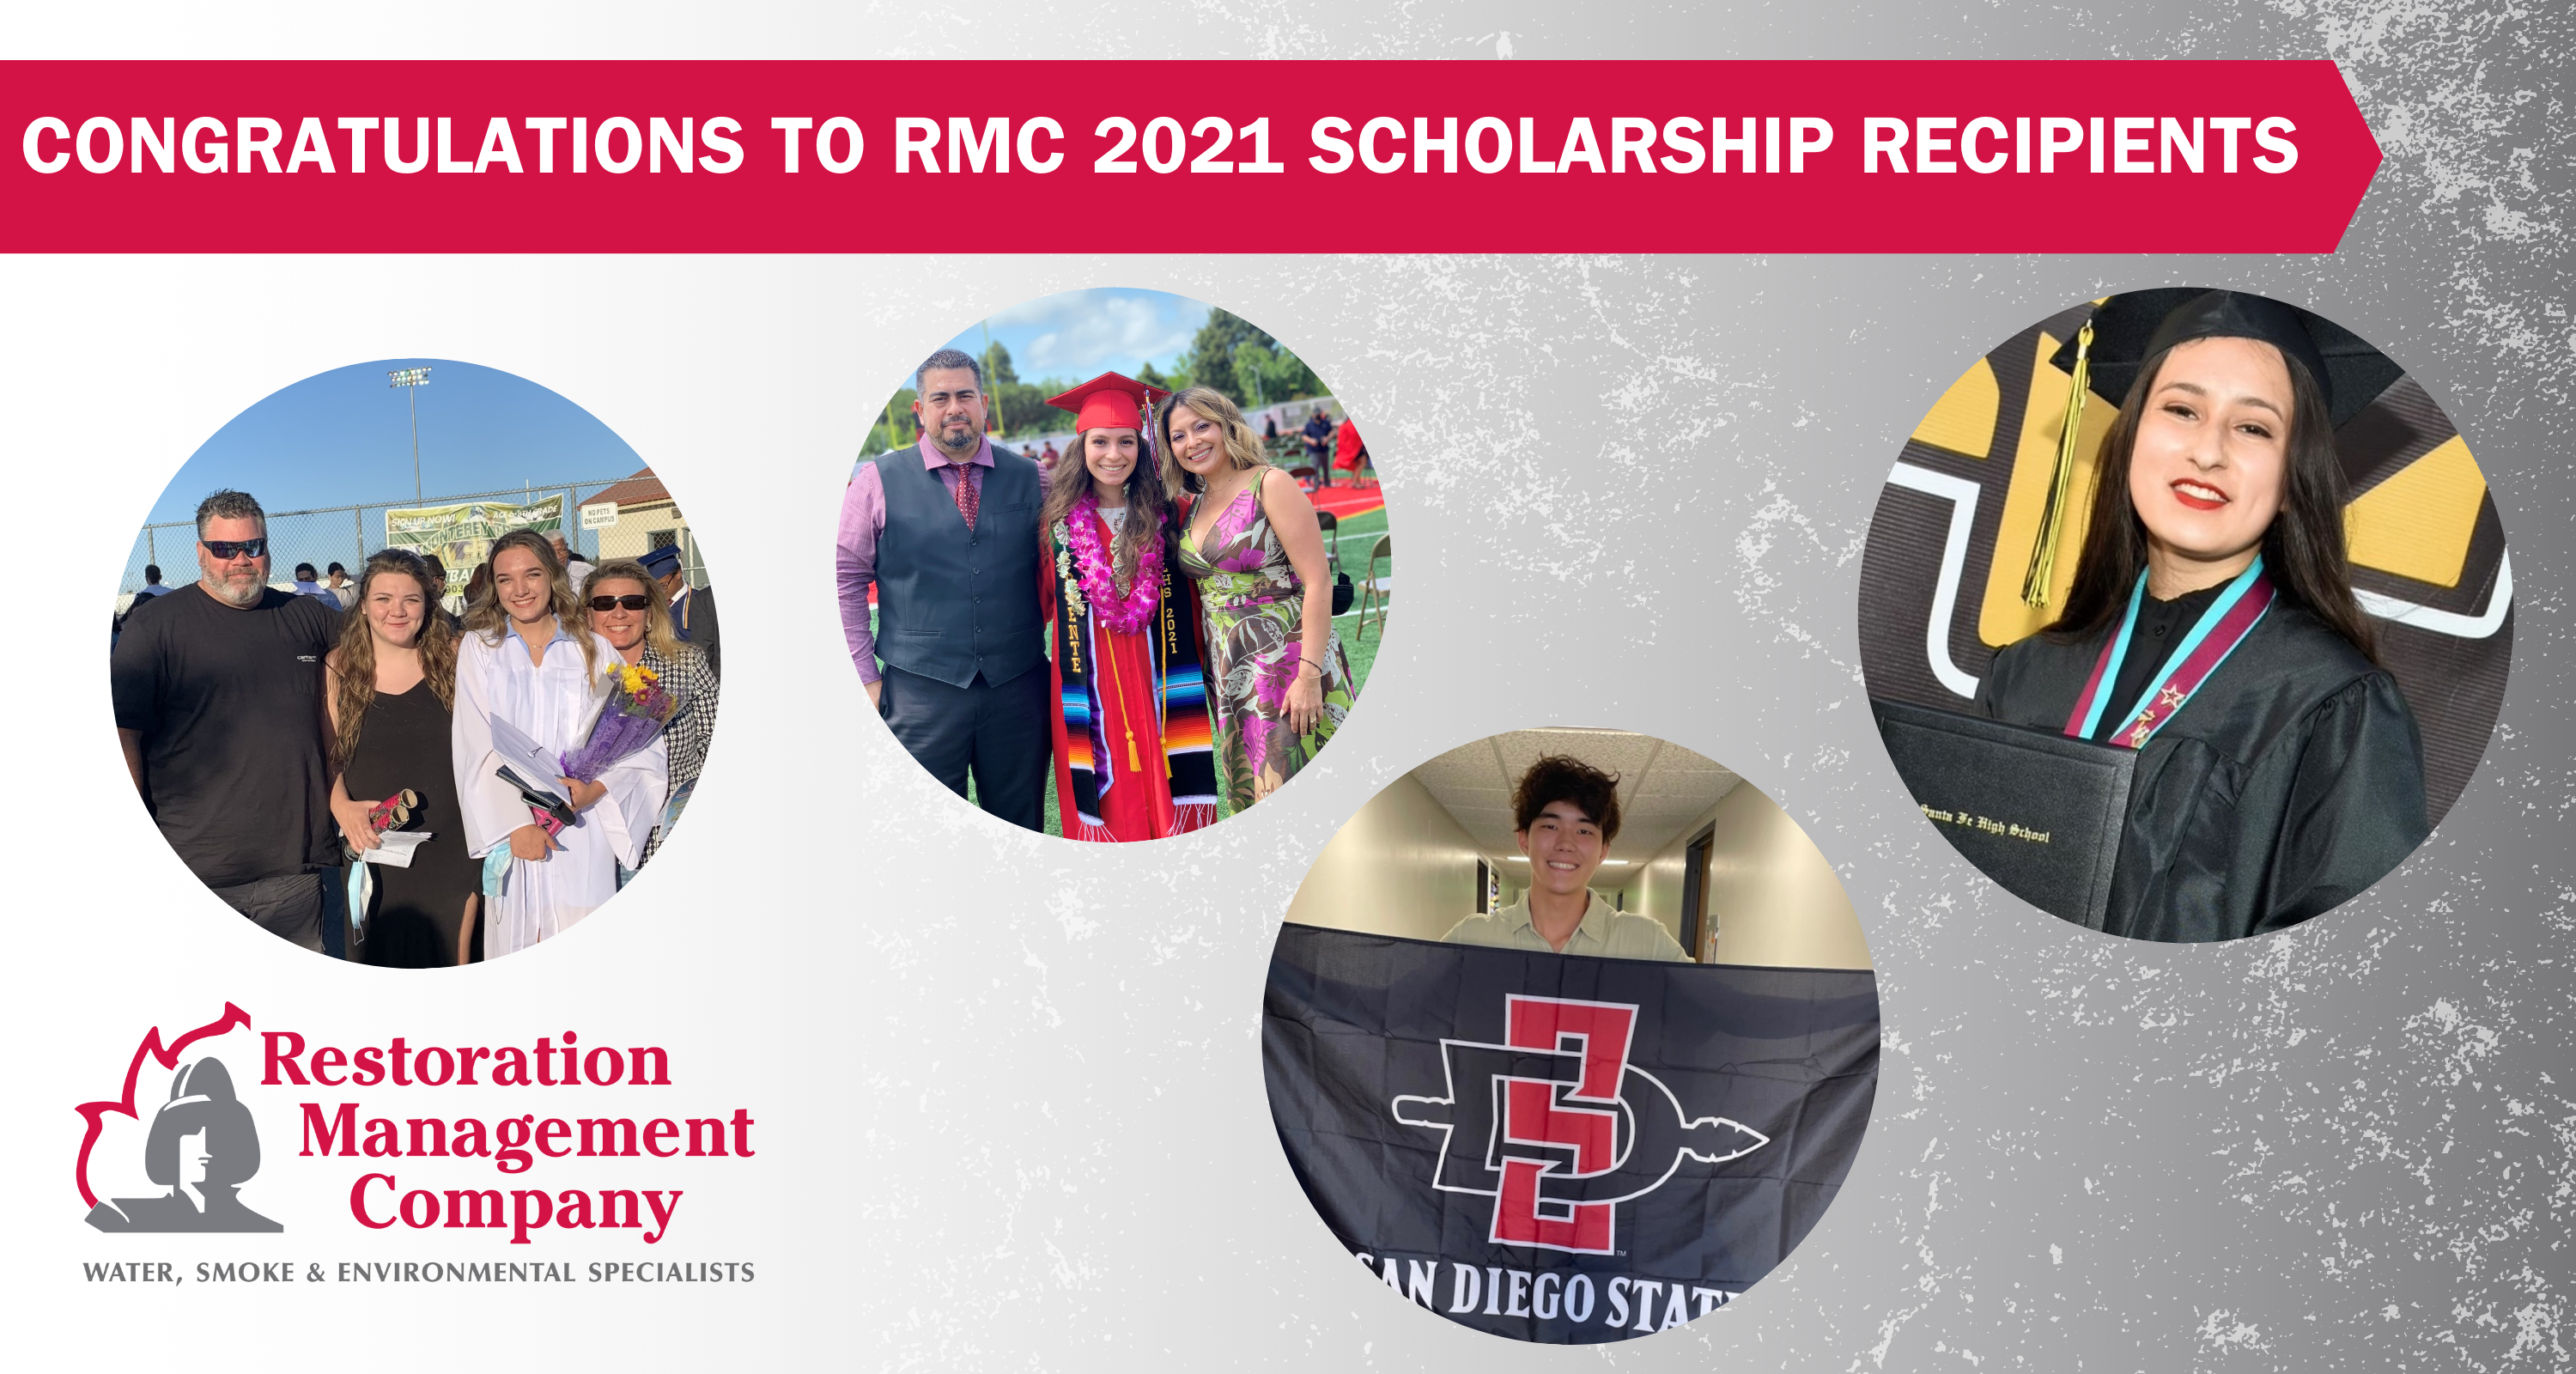 RMC Grants Six Students Scholarships to School of Choice